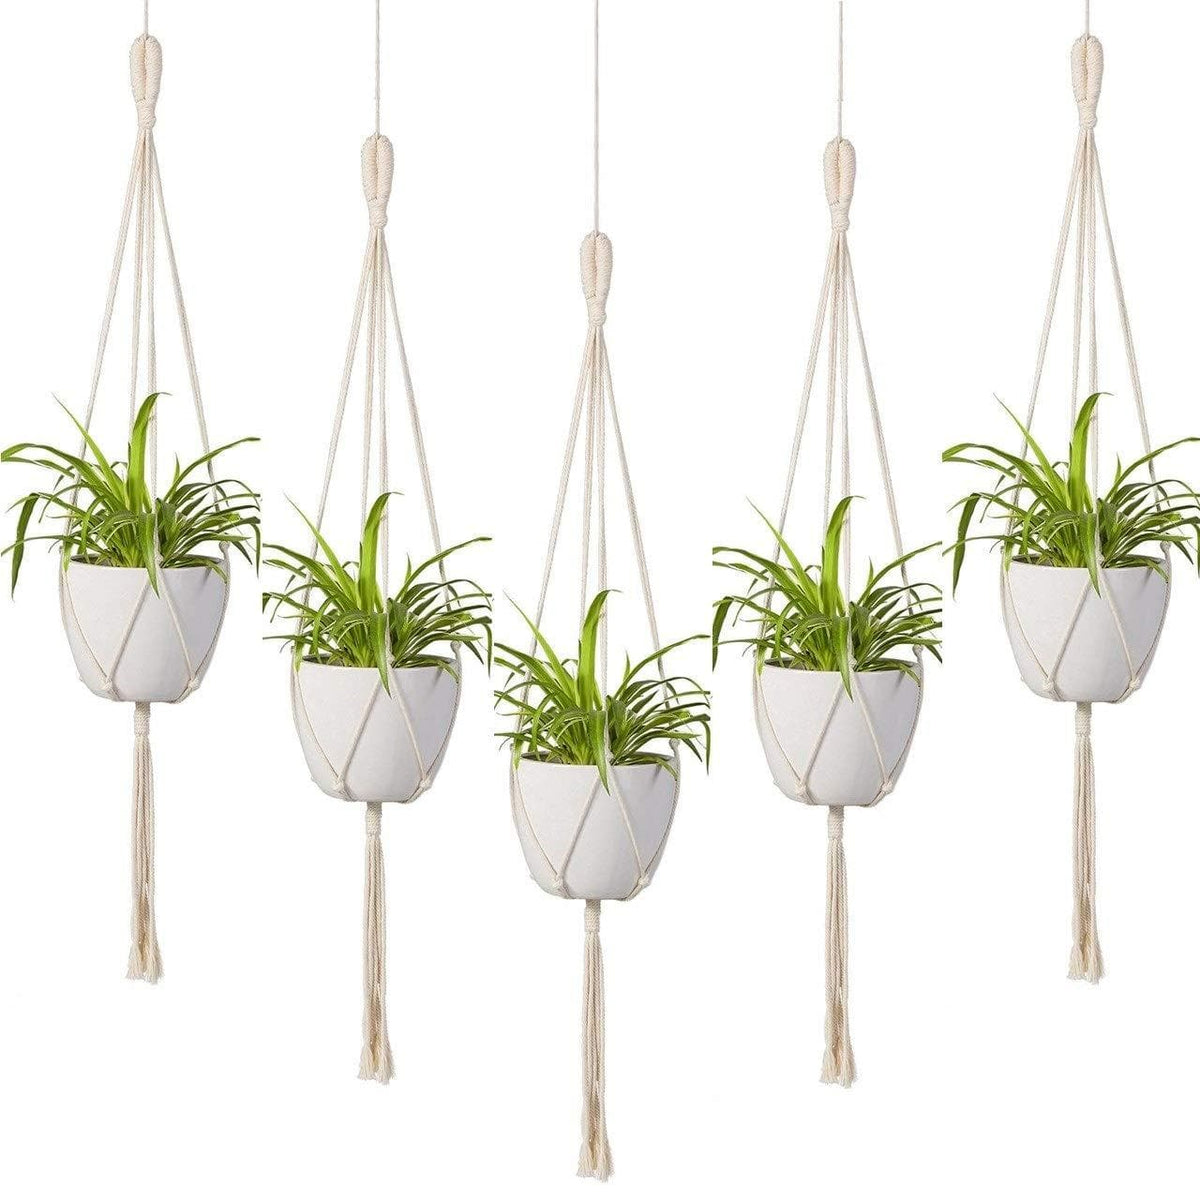 ecofynd Macrame Plant Hanger [Without Pot]|Rope Flower Pot Holder For Indoor Outdoor Balcony Gardening (M2,Pack Of 5,39 Inches),Ivory - halfpeapp